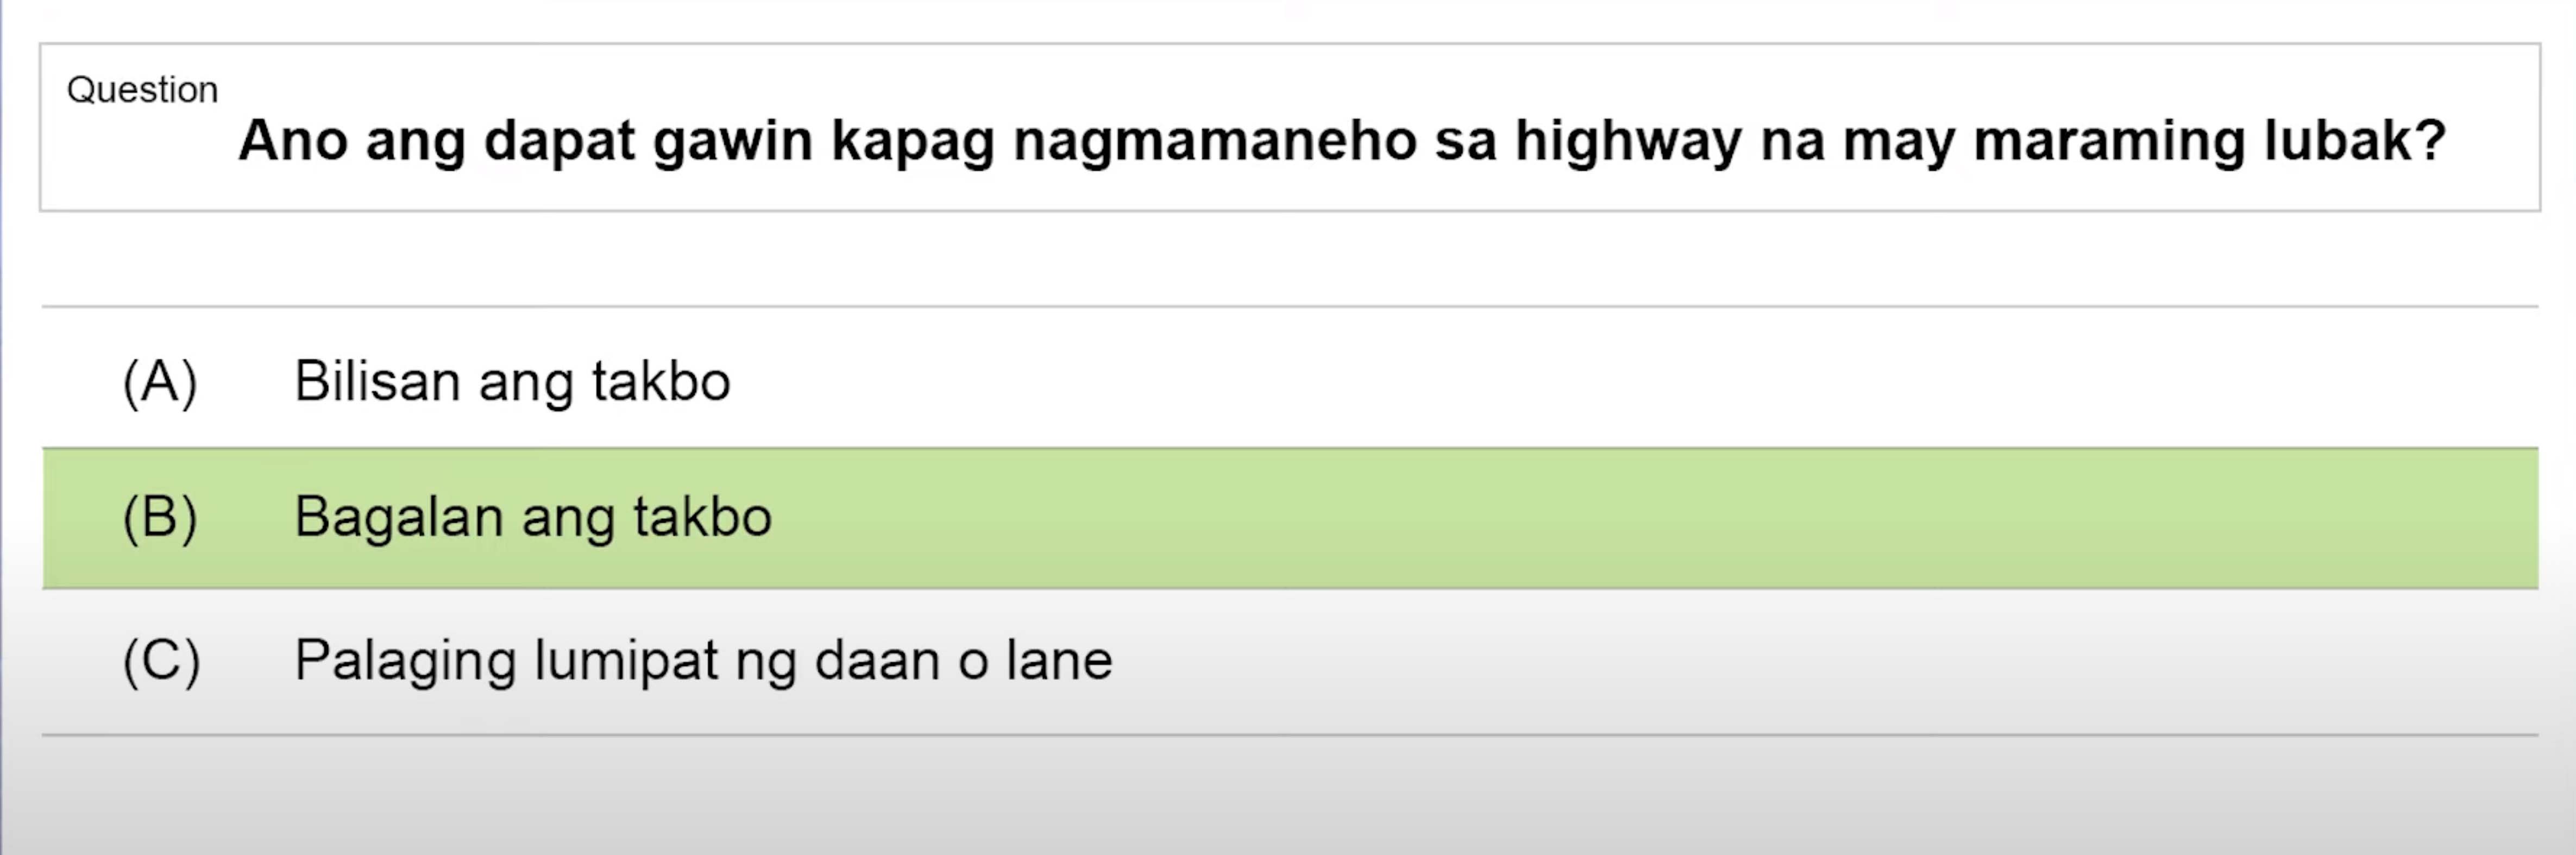 LTO Tagalog non pro exam reviewer motorcycle (1)